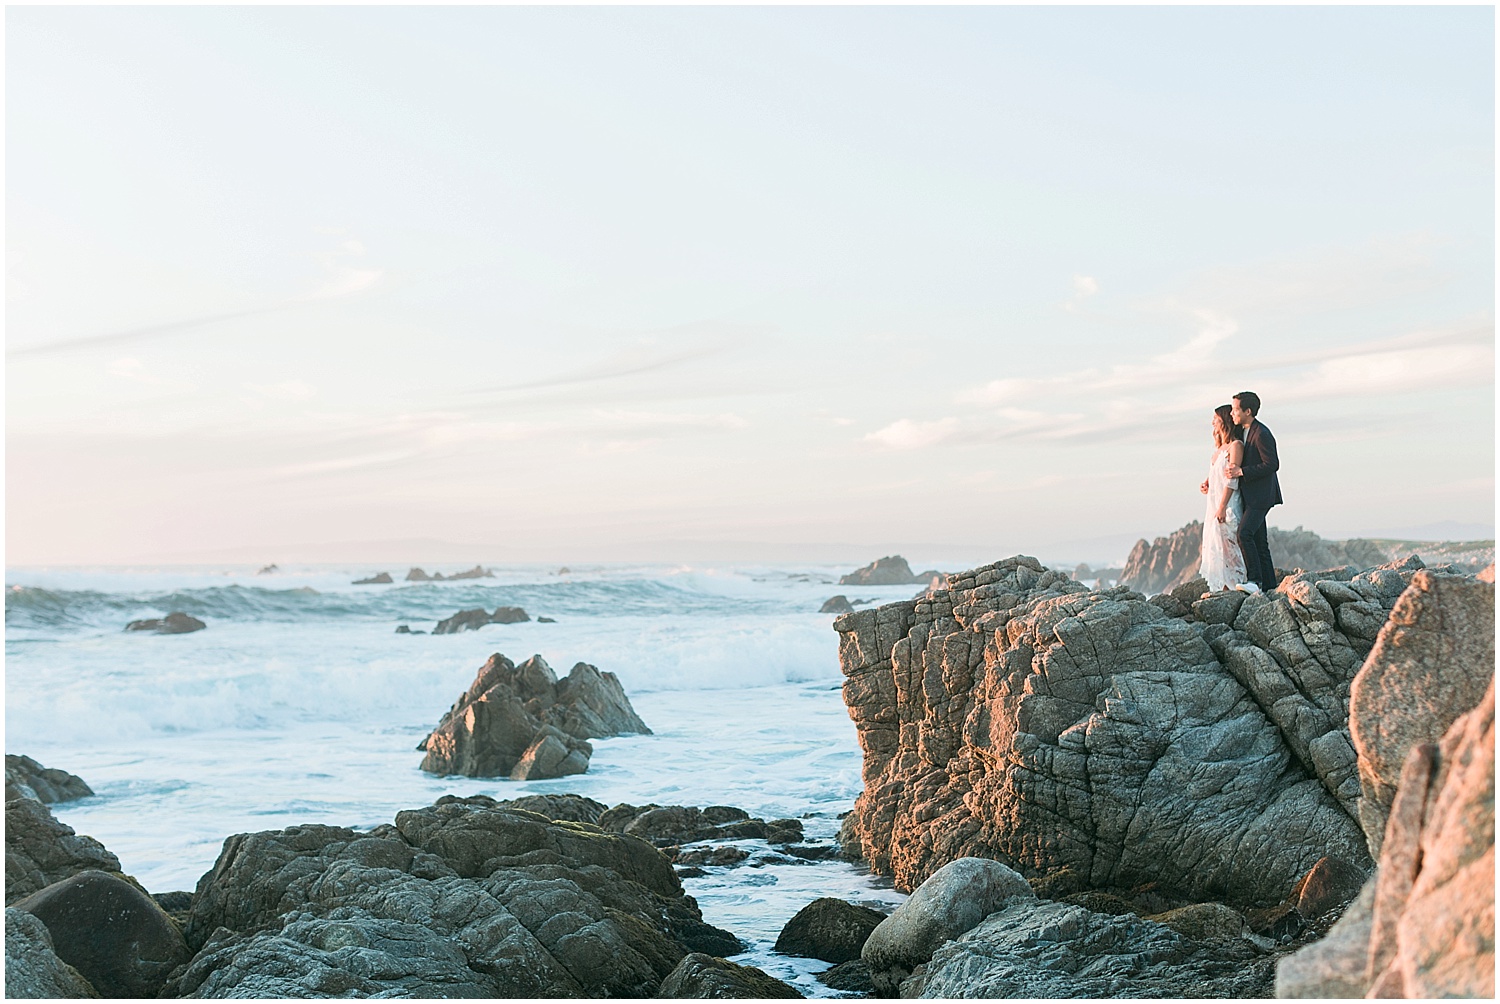 carmel_by_the_sea_17_mile_drive_engagement_session-022.jpg